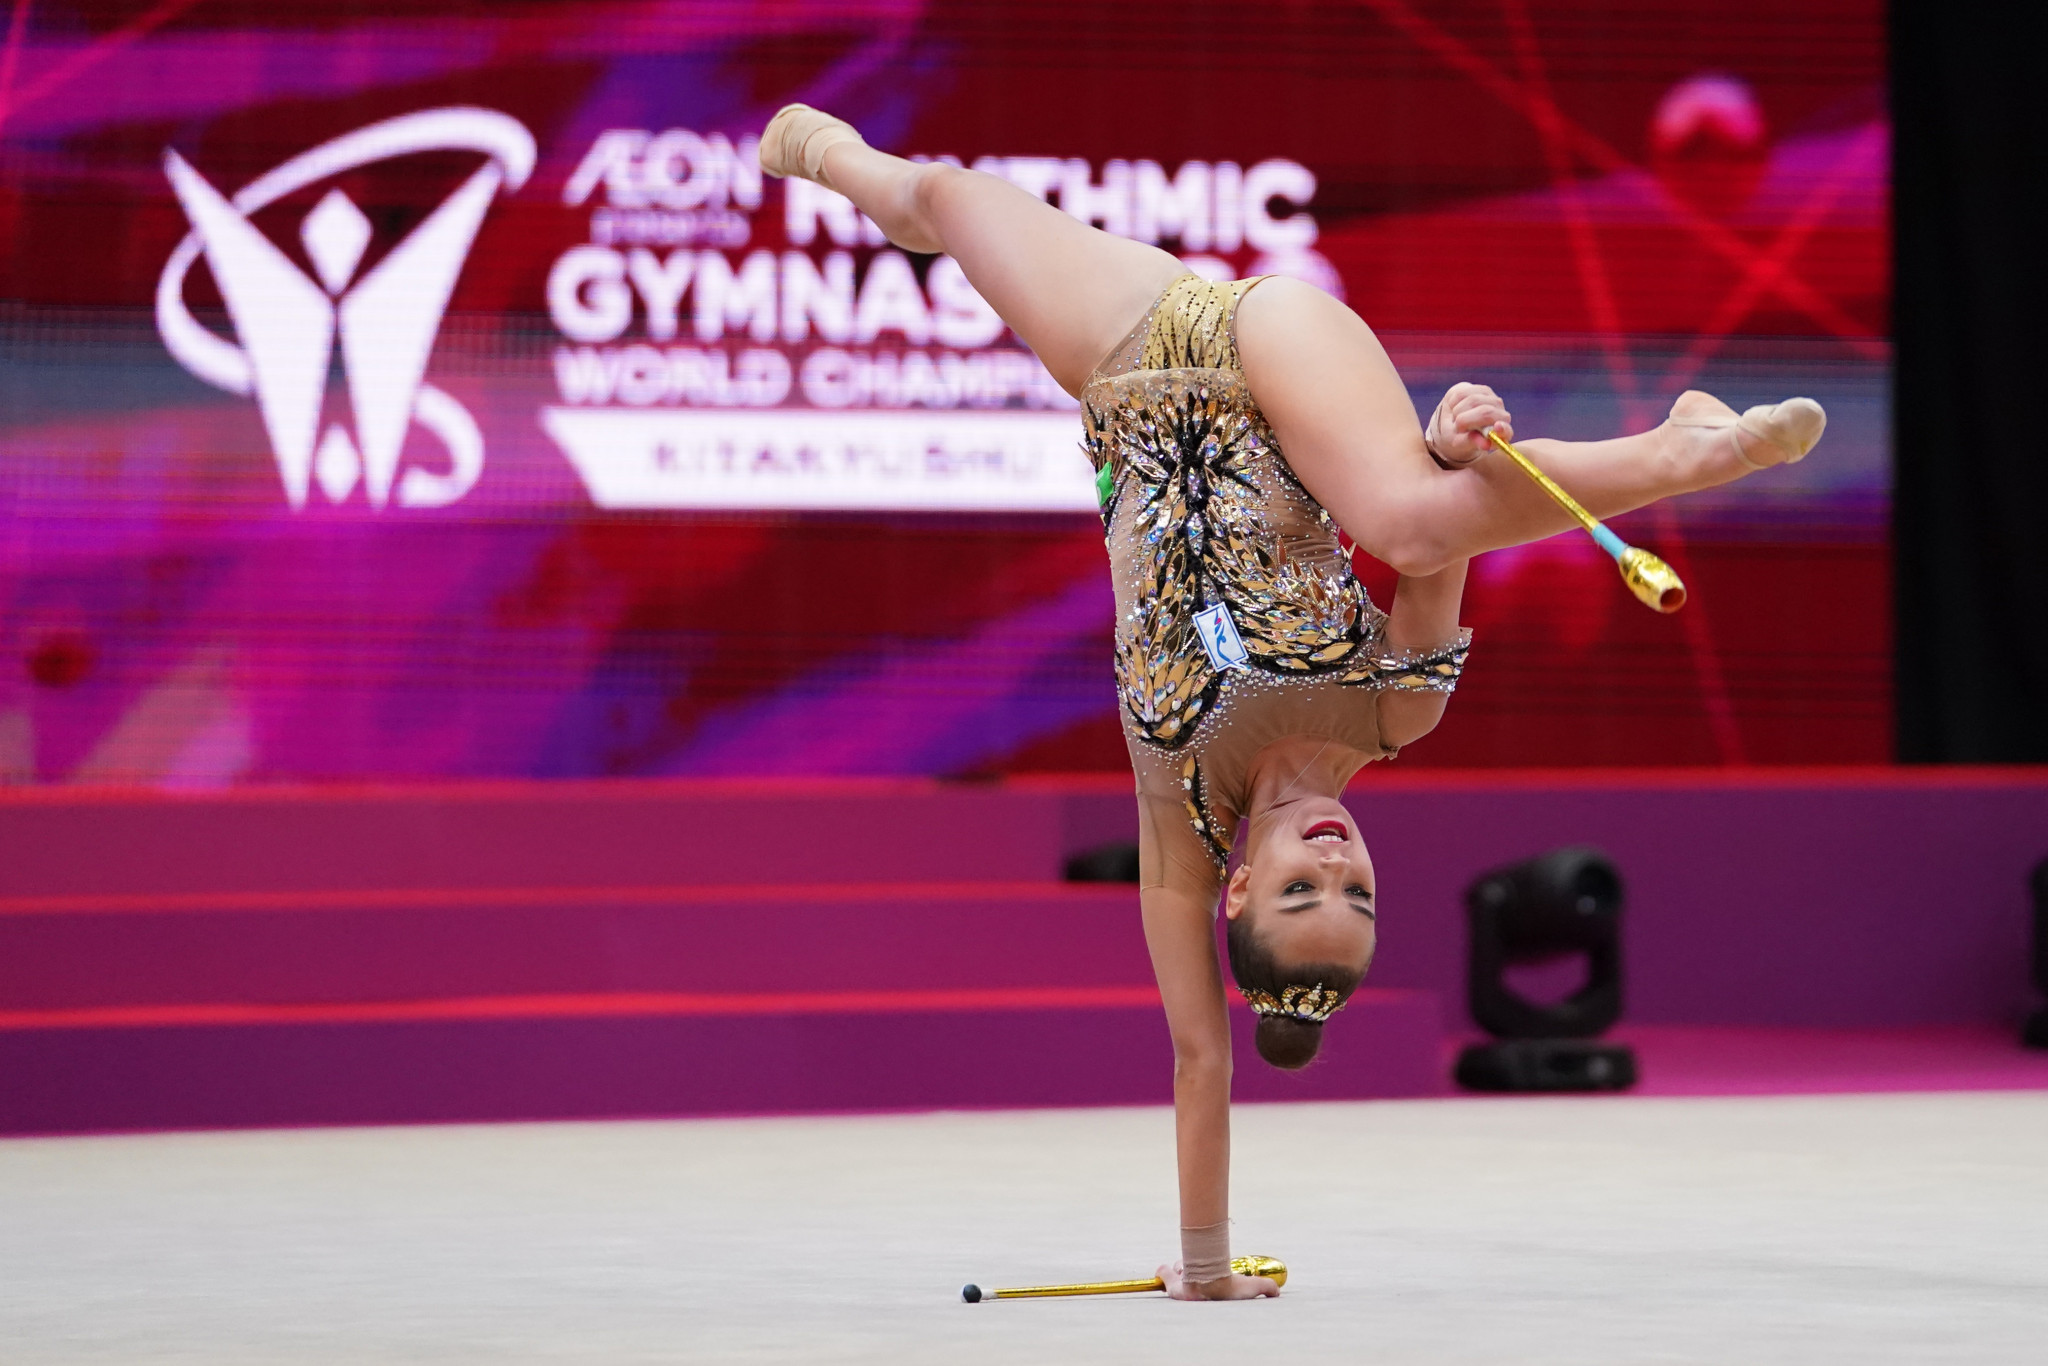 Averina within touching distance of all-time record at Rhythmic Gymnastics World Championships 